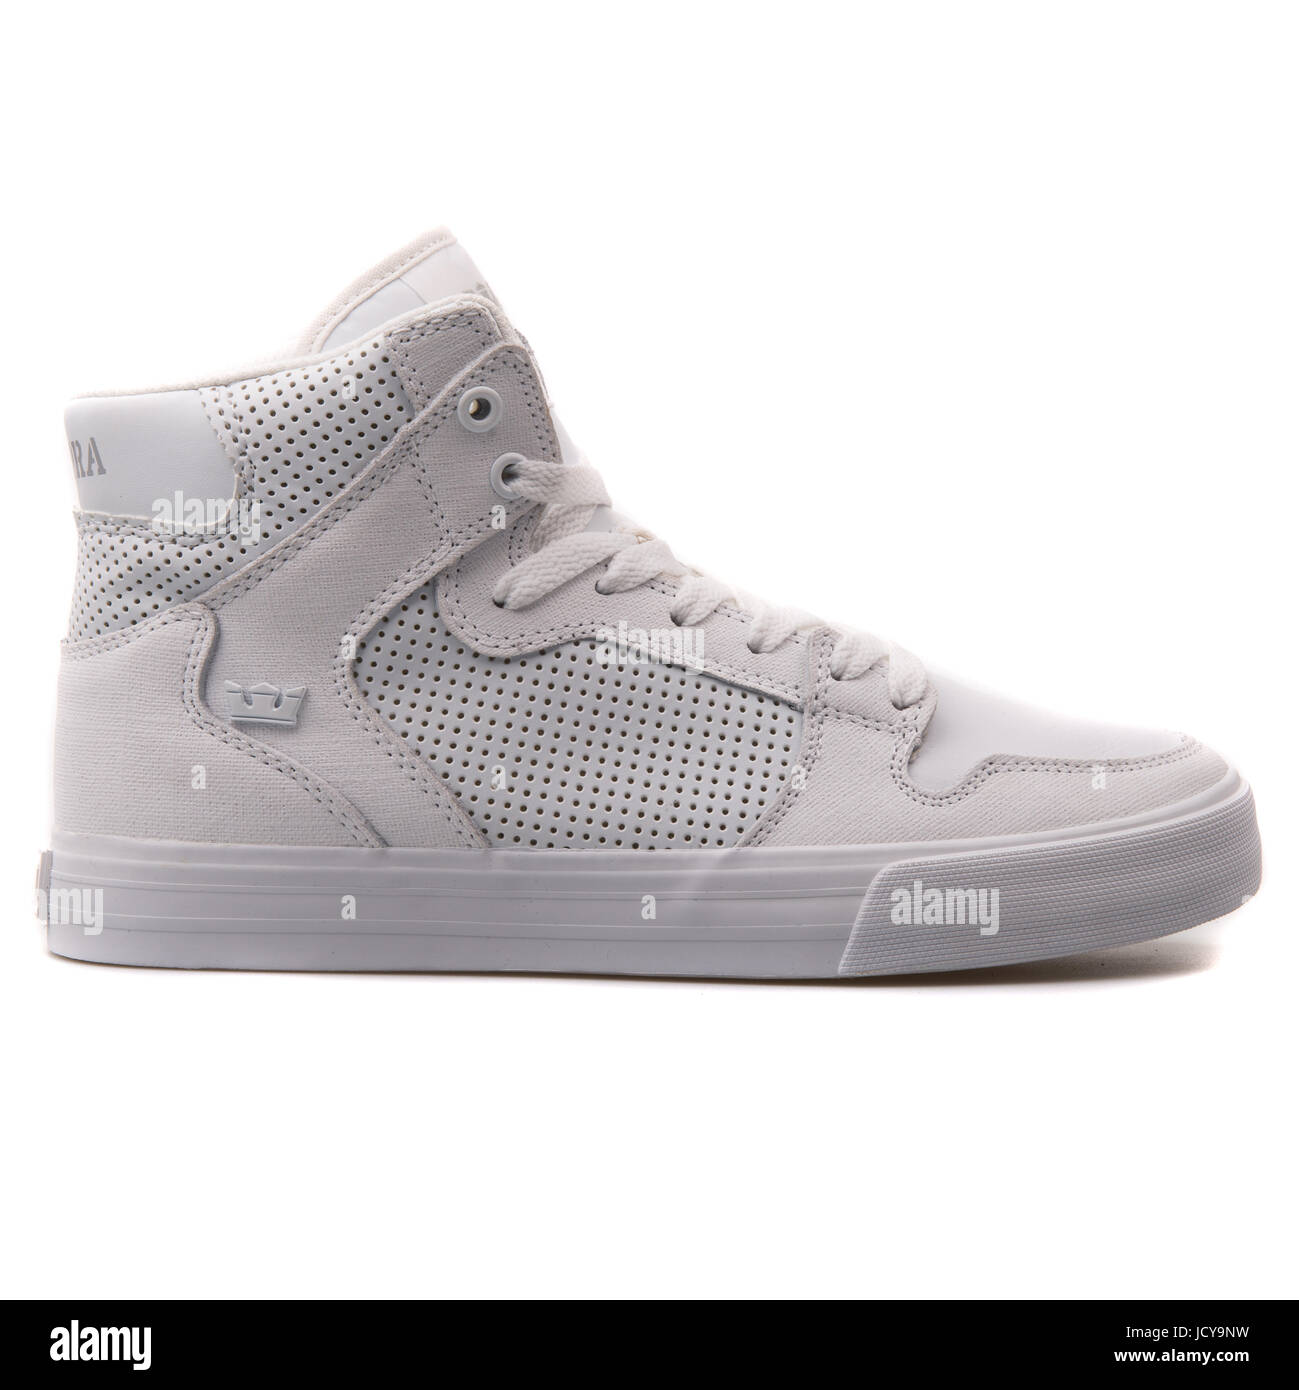 Supra Vaider chaussures sportives pour hommes Blanc - S28193 Photo Stock -  Alamy